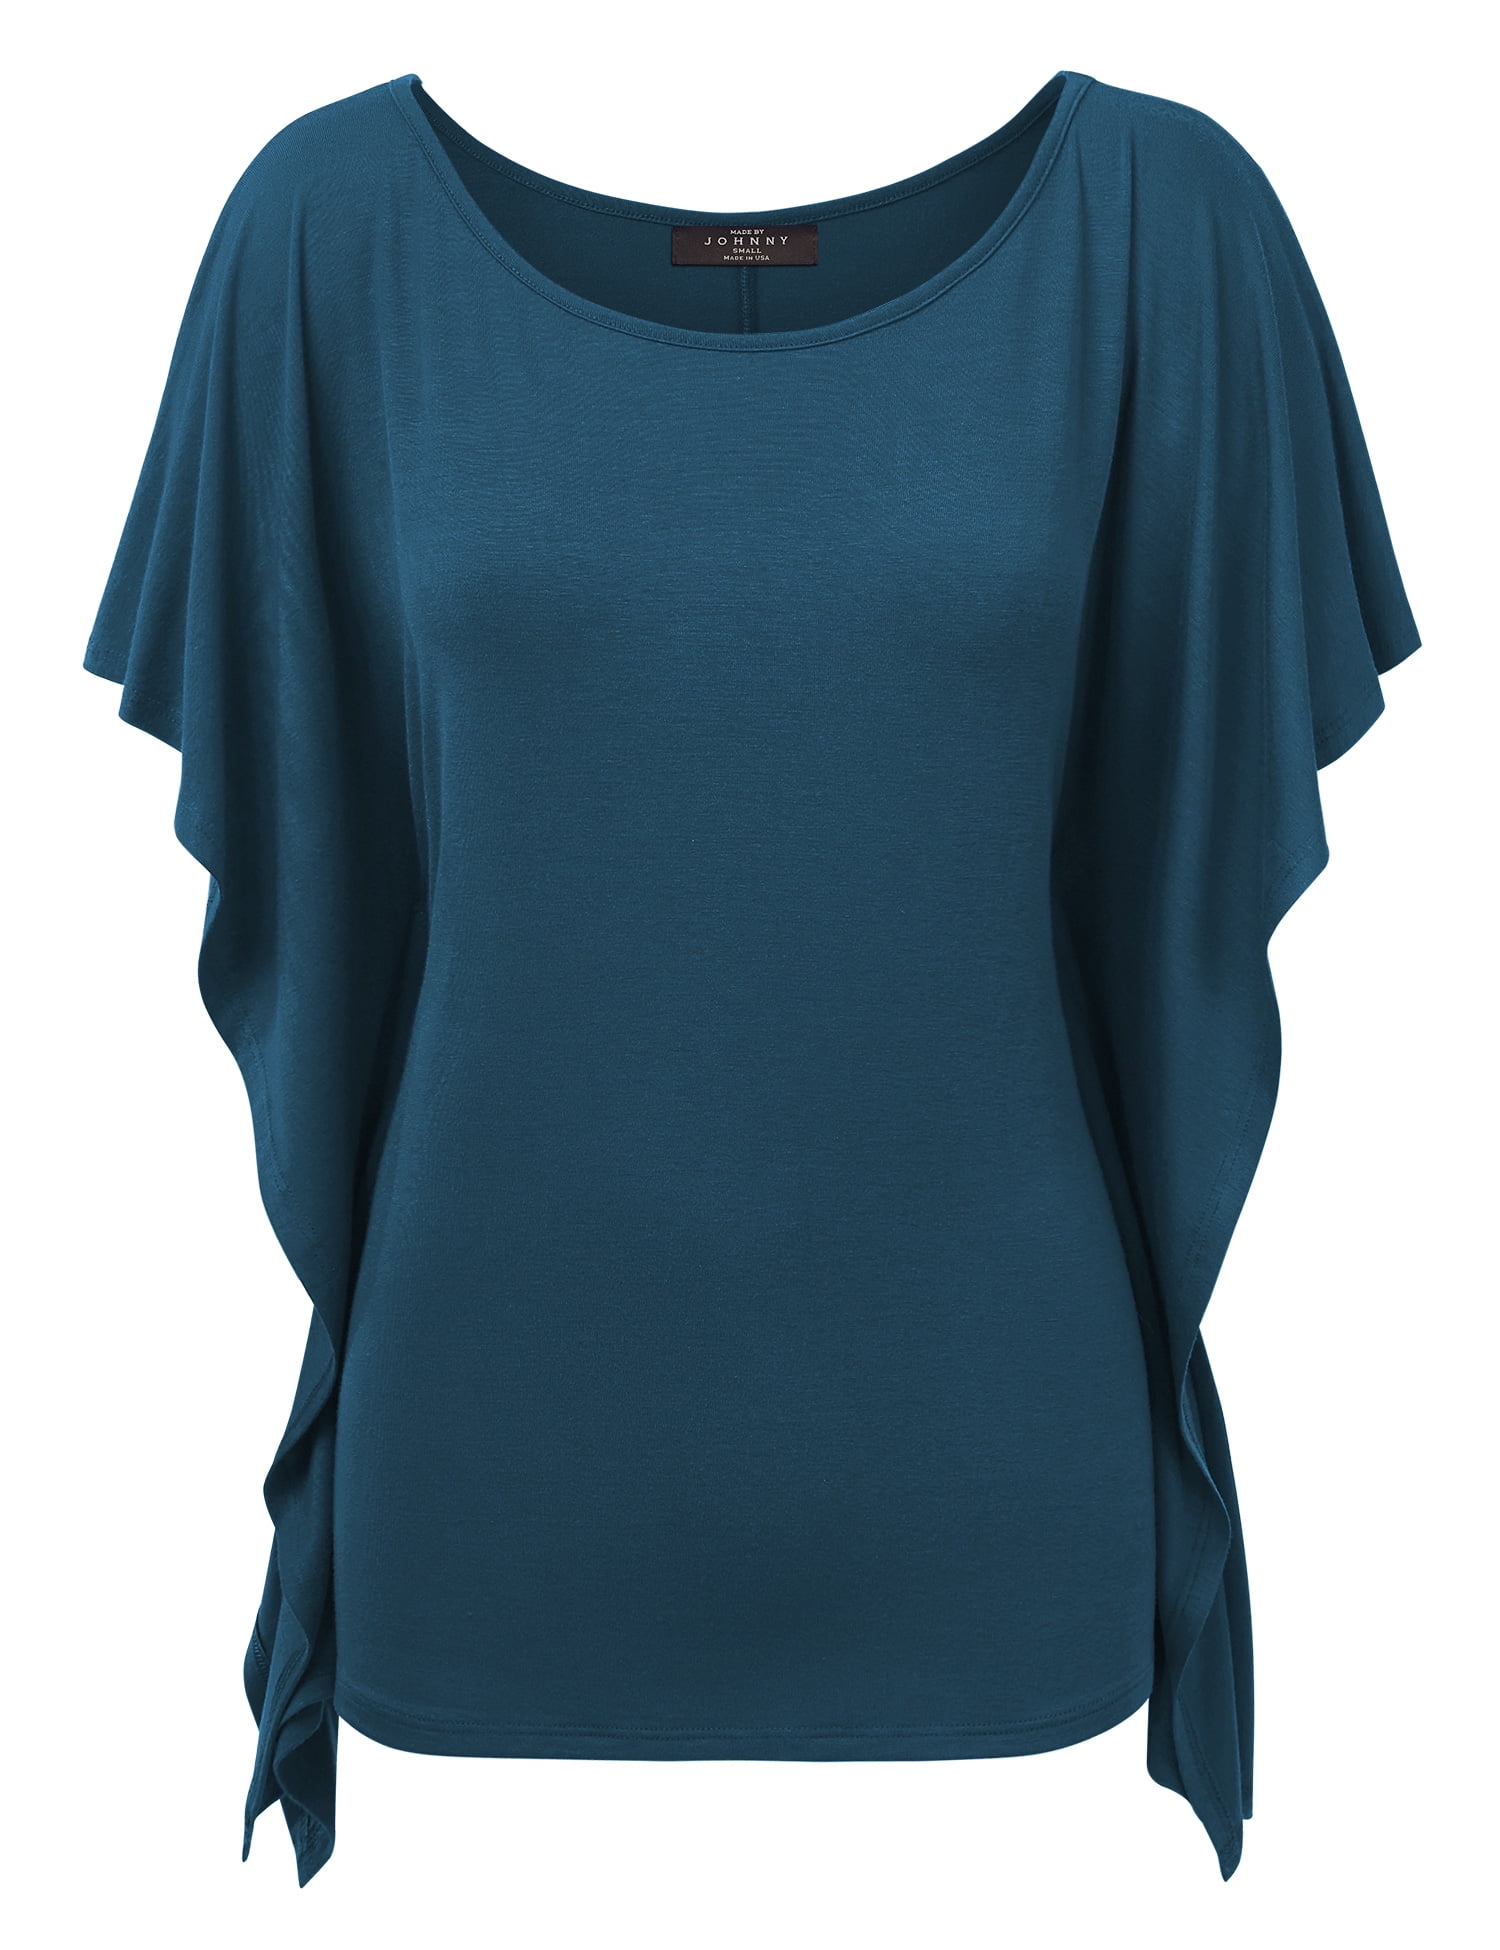 WT1340 Womens Solid Scoop Neck Short Sleeve Poncho Tunic Top XXXL Teal ...